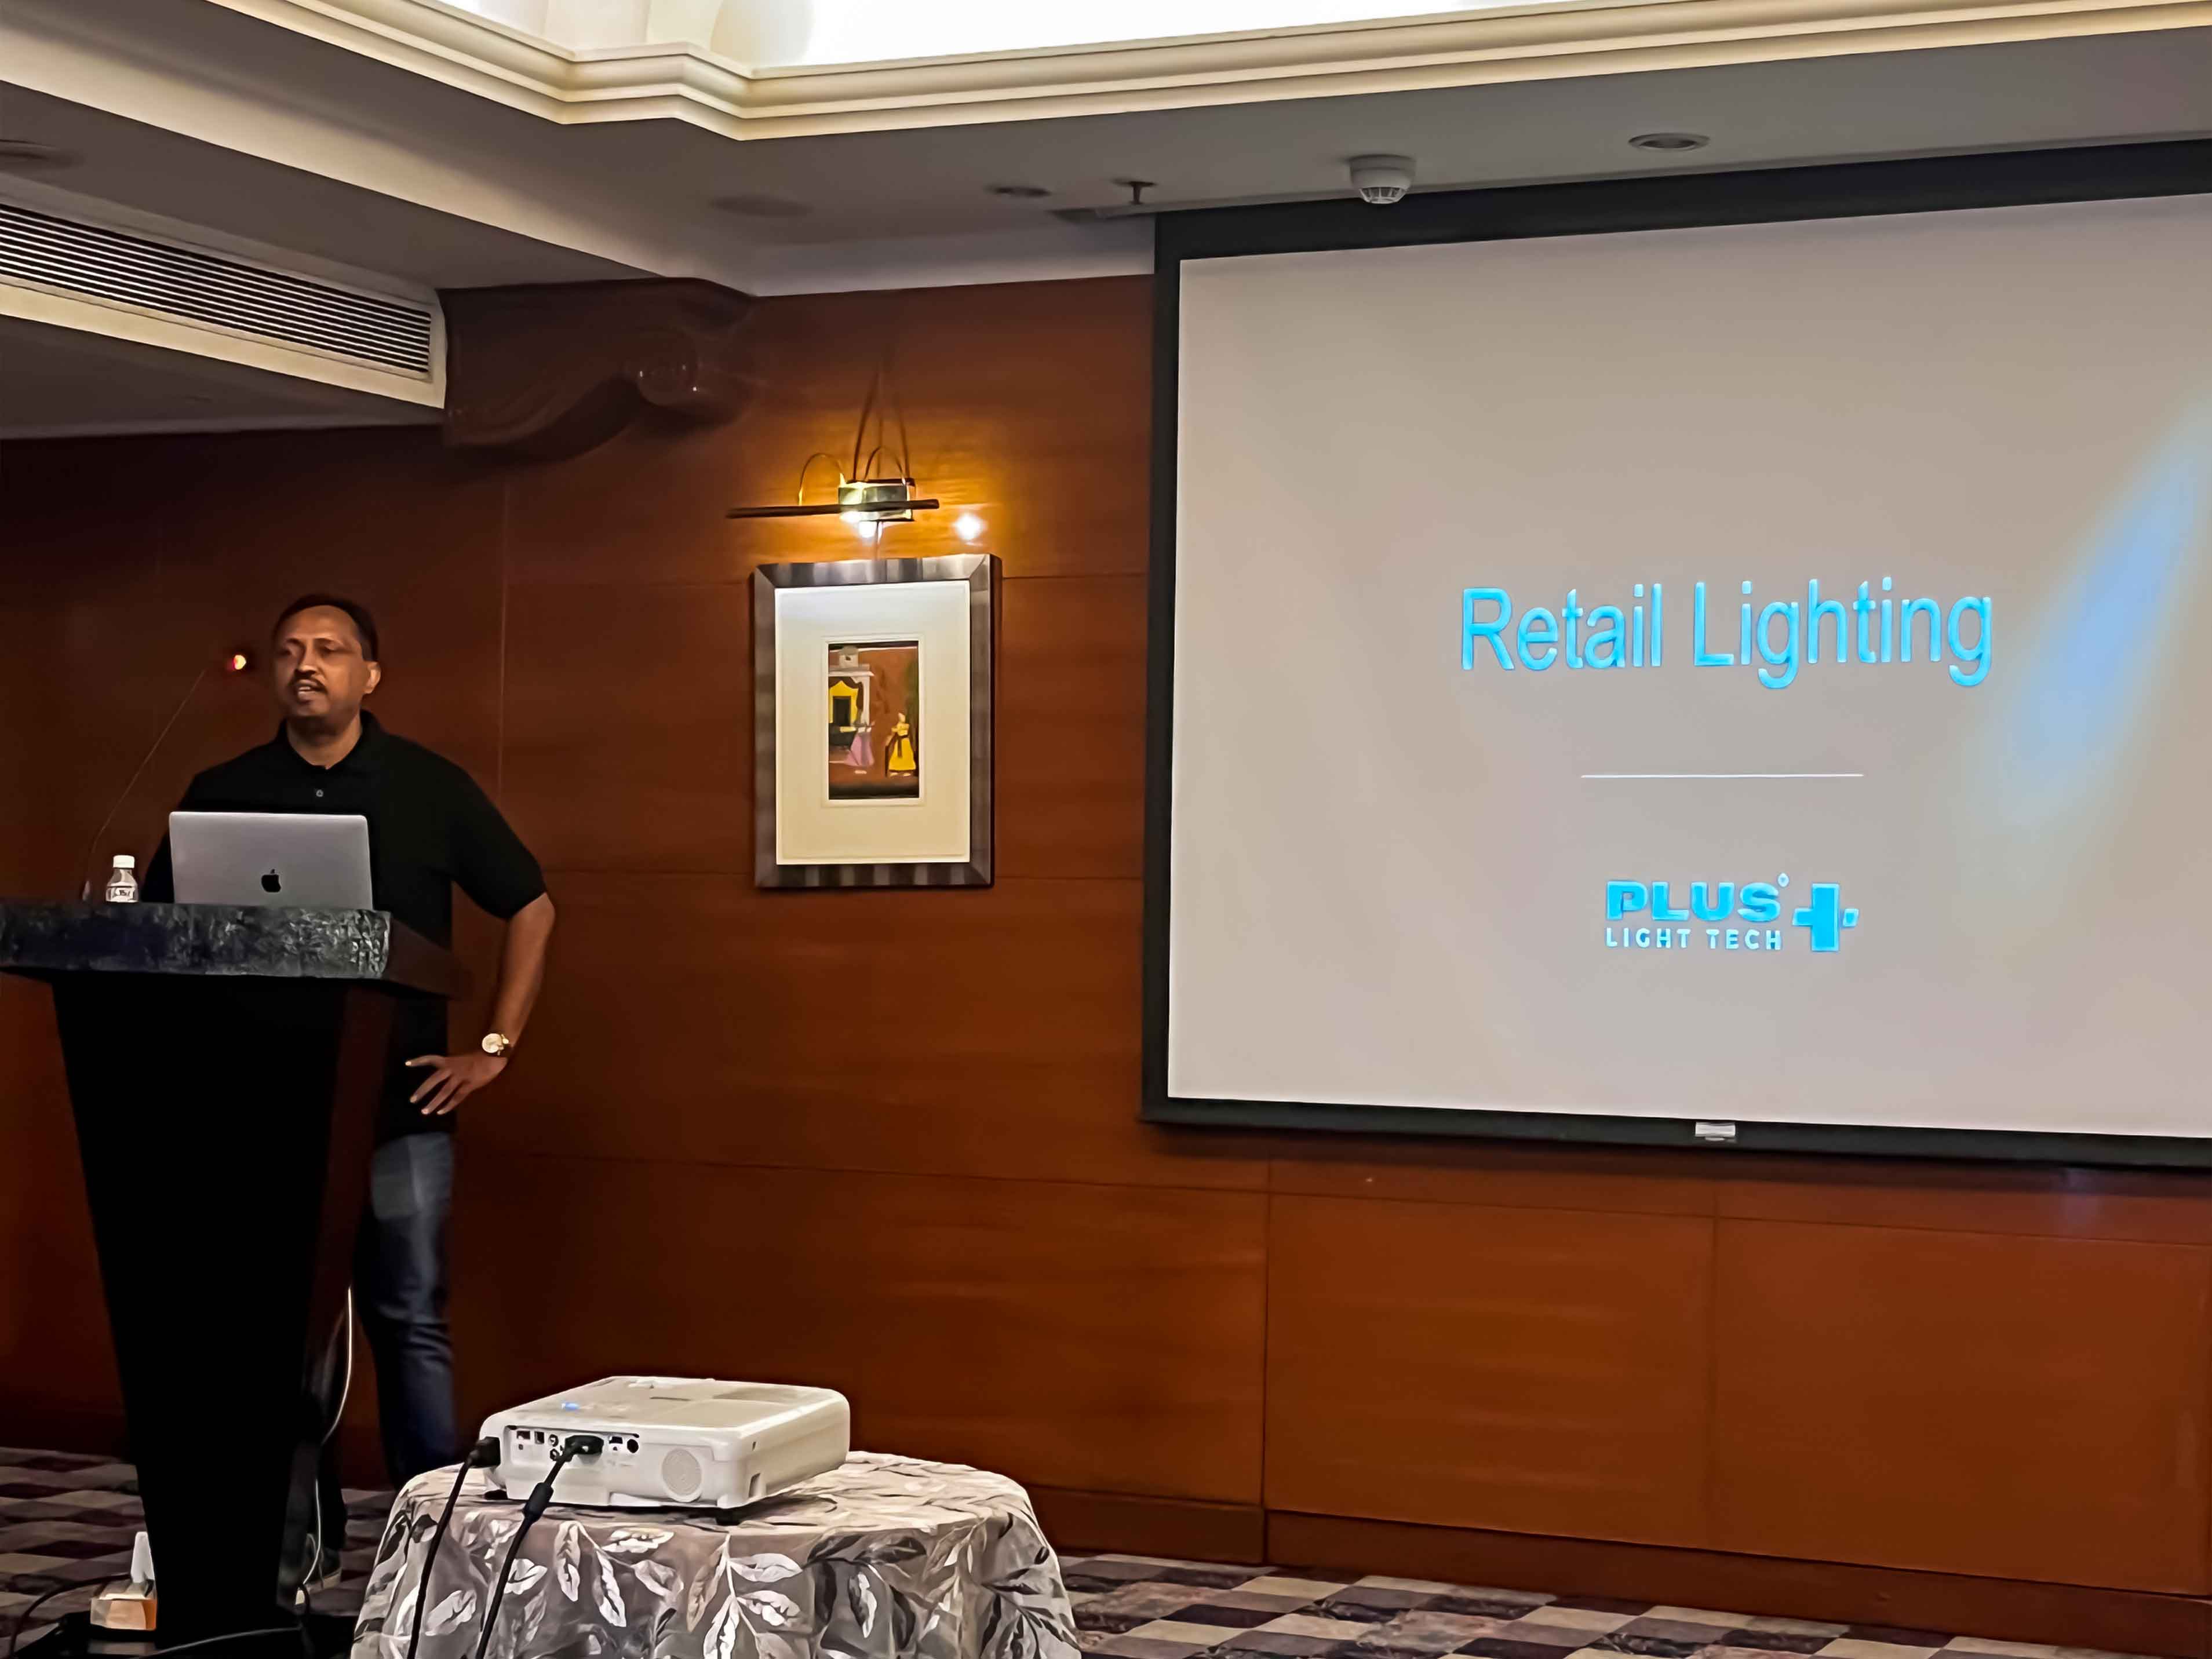 Santosh Prasad, National Head - Sales at Focus Lighting and Fixtures Ltd, throwing light on new innovations in lighting that enhance merchandise presentation and deliver better value.